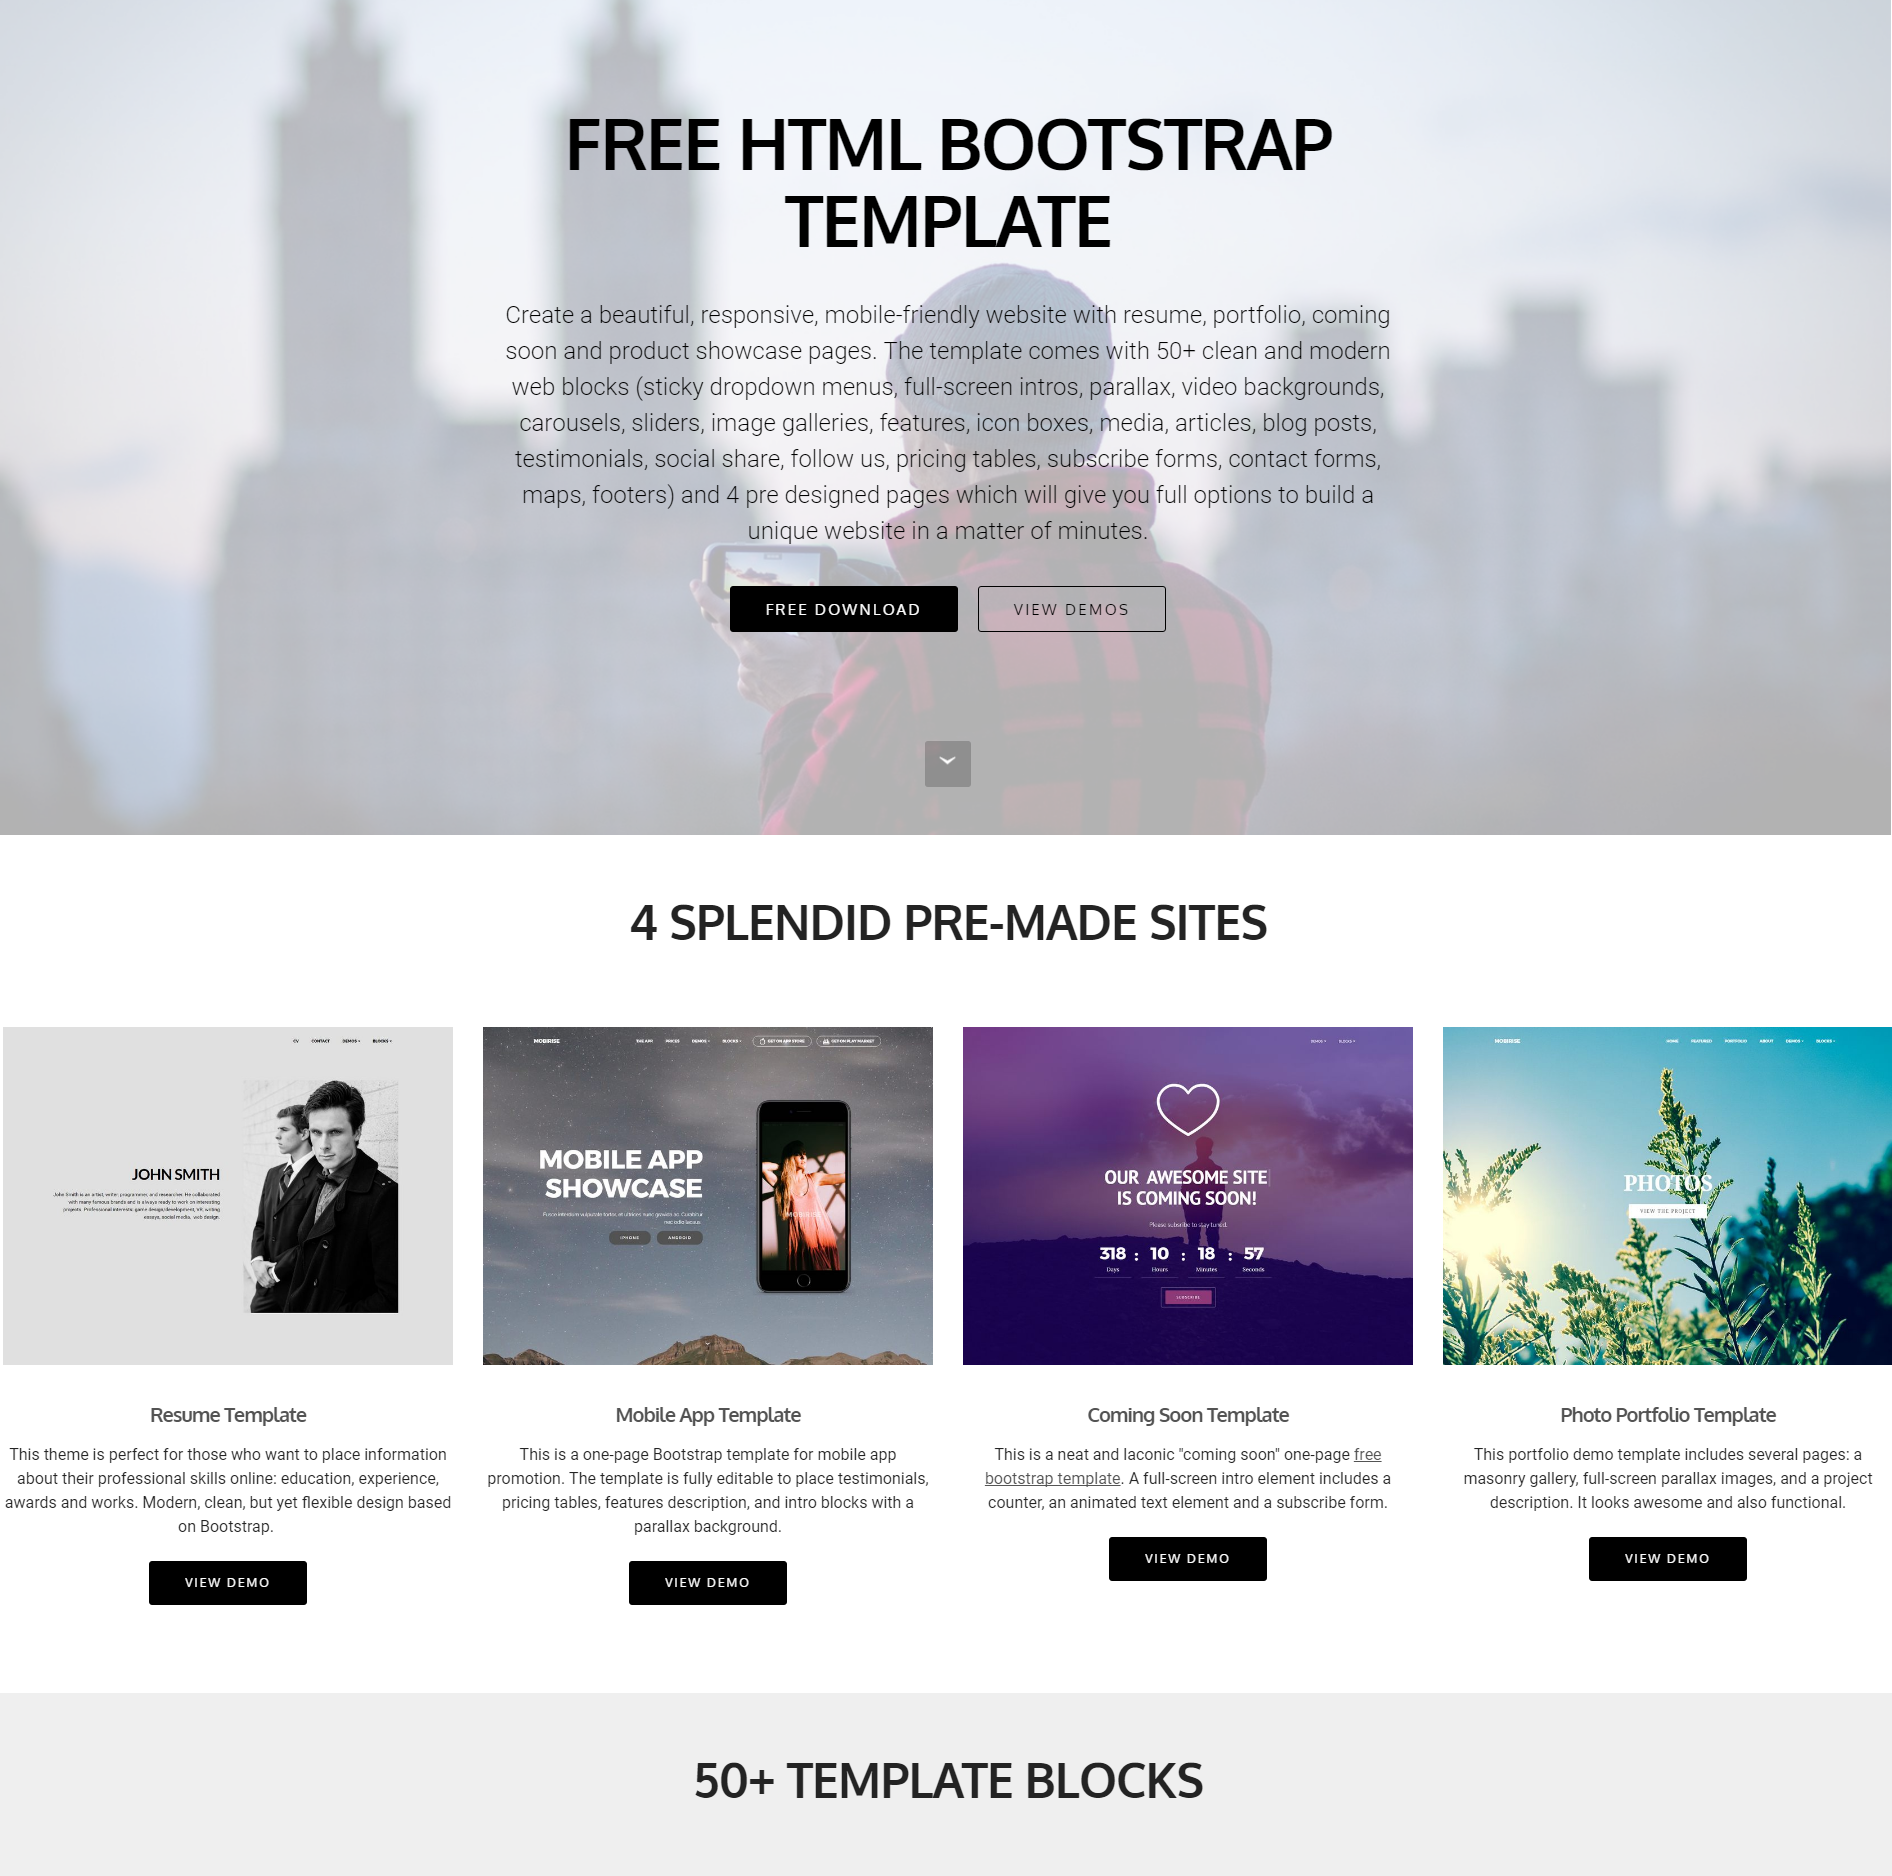 HTML5 Bootstrap Templates